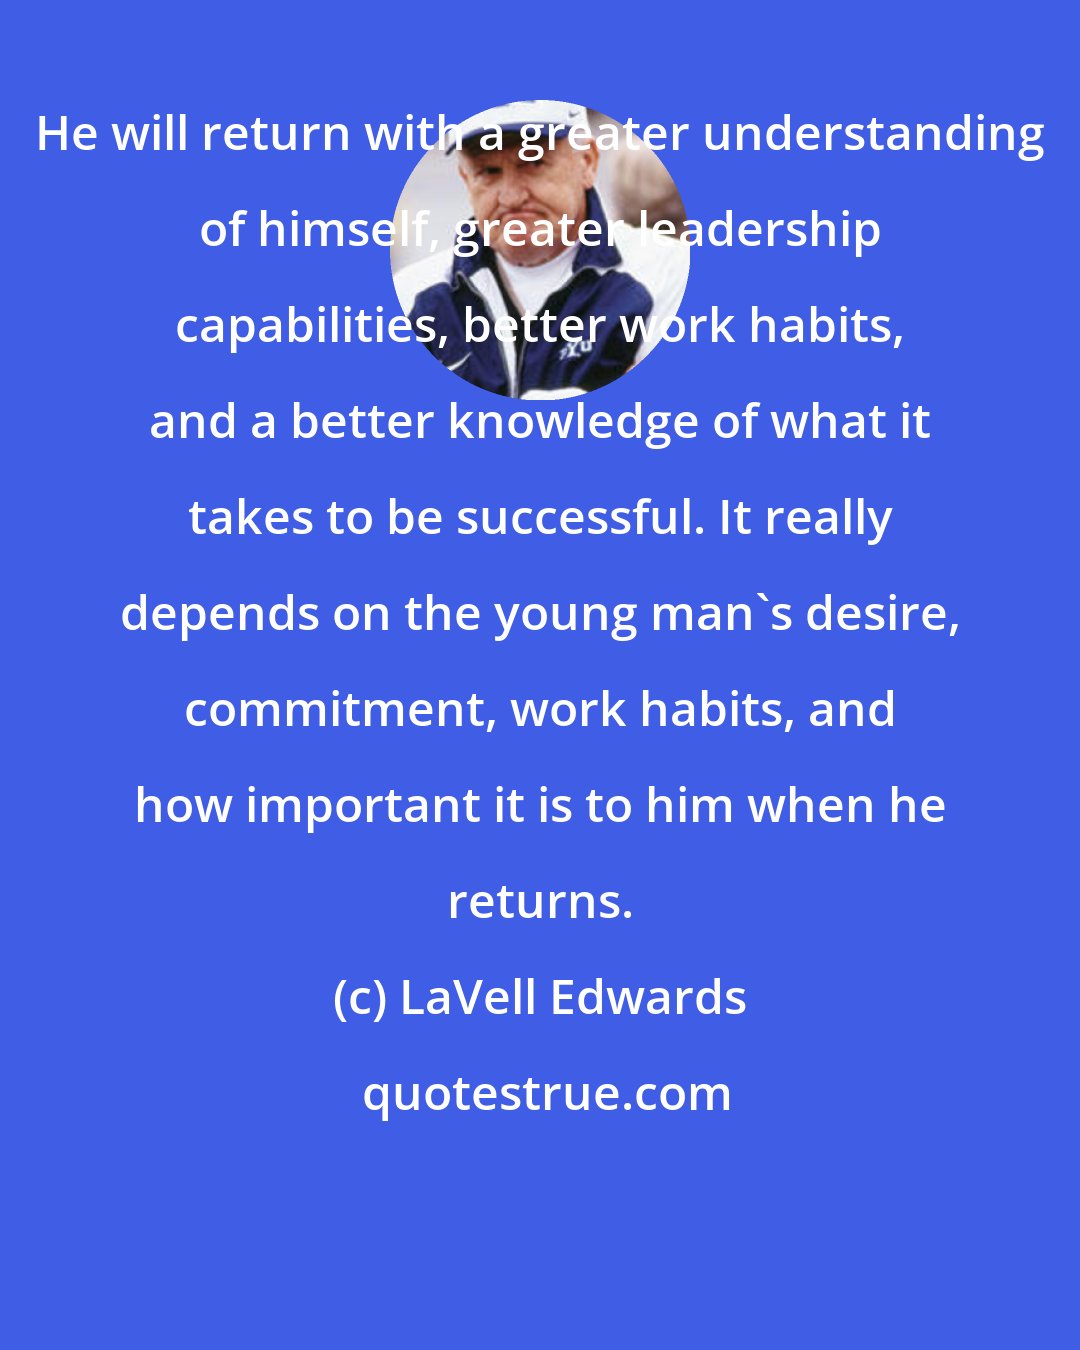 LaVell Edwards: He will return with a greater understanding of himself, greater leadership capabilities, better work habits, and a better knowledge of what it takes to be successful. It really depends on the young man's desire, commitment, work habits, and how important it is to him when he returns.